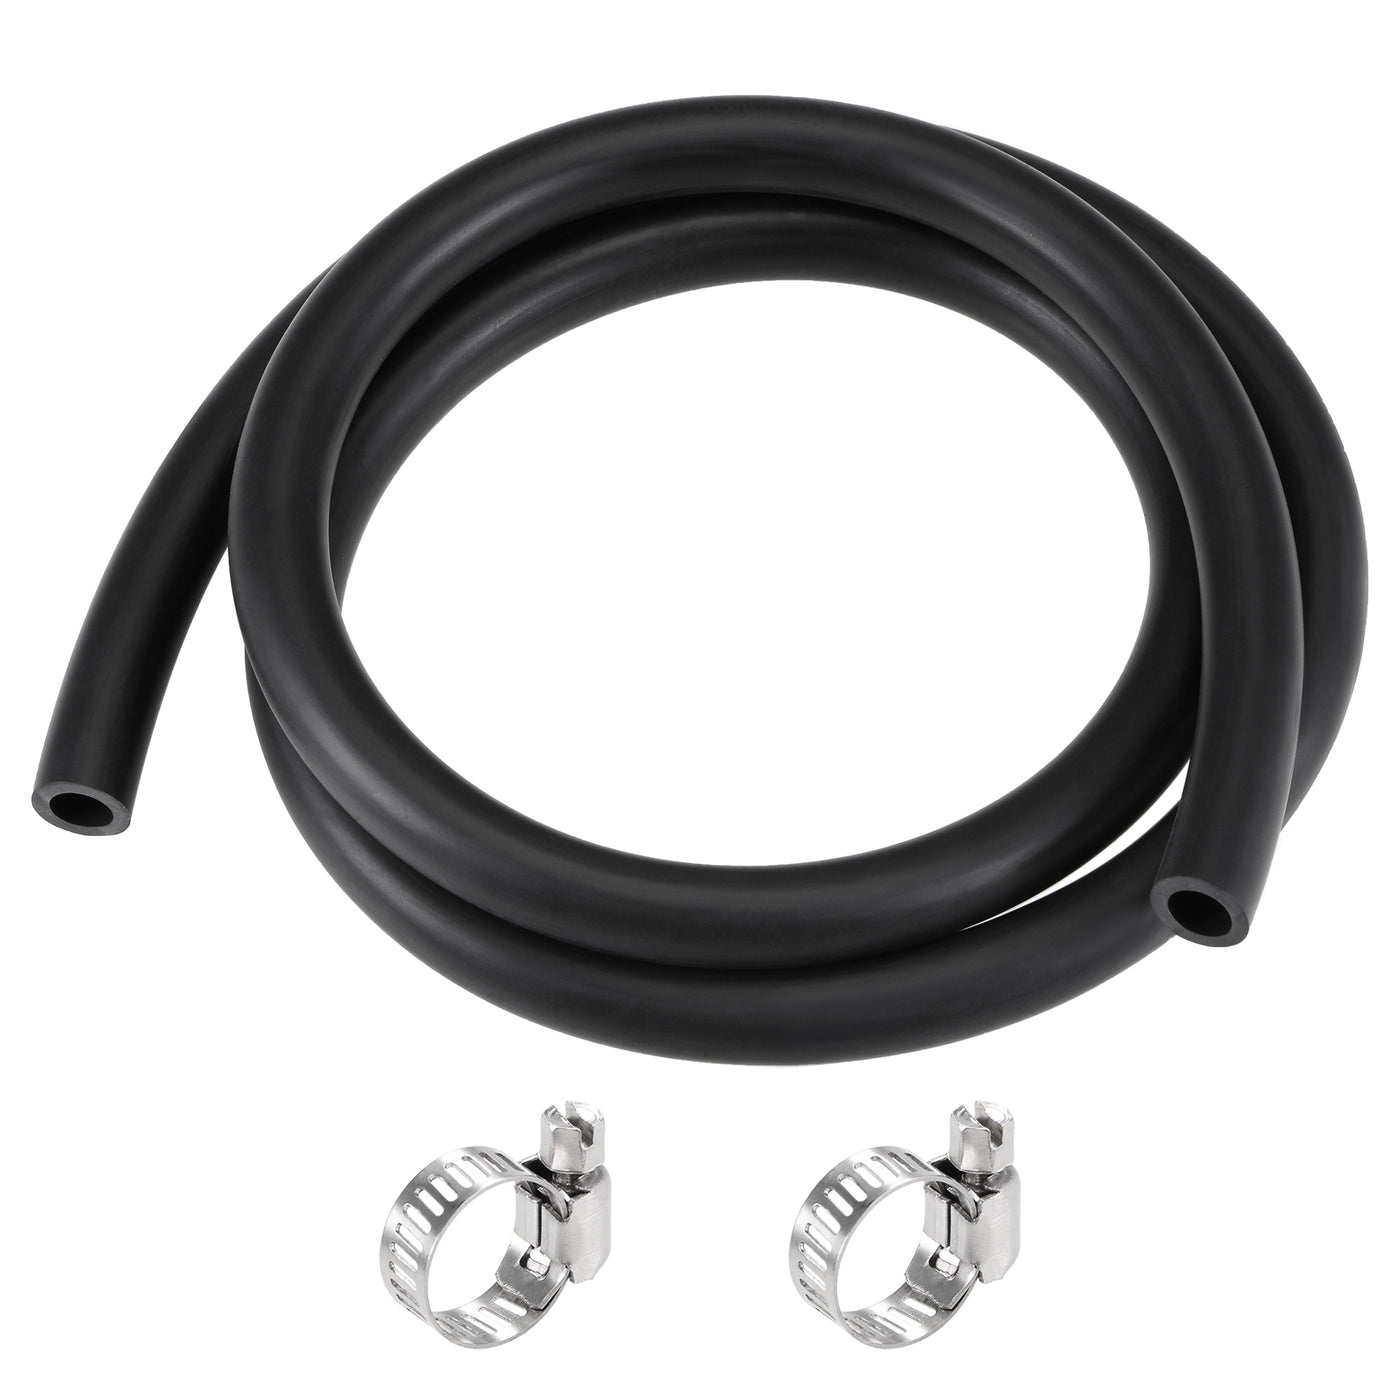 Uxcell Uxcell Fuel Line Hose 10mm ID 16mm OD 3.3ft Oil Line & Fuel Pipe Rubber Water Hose Black, 2 Clamps